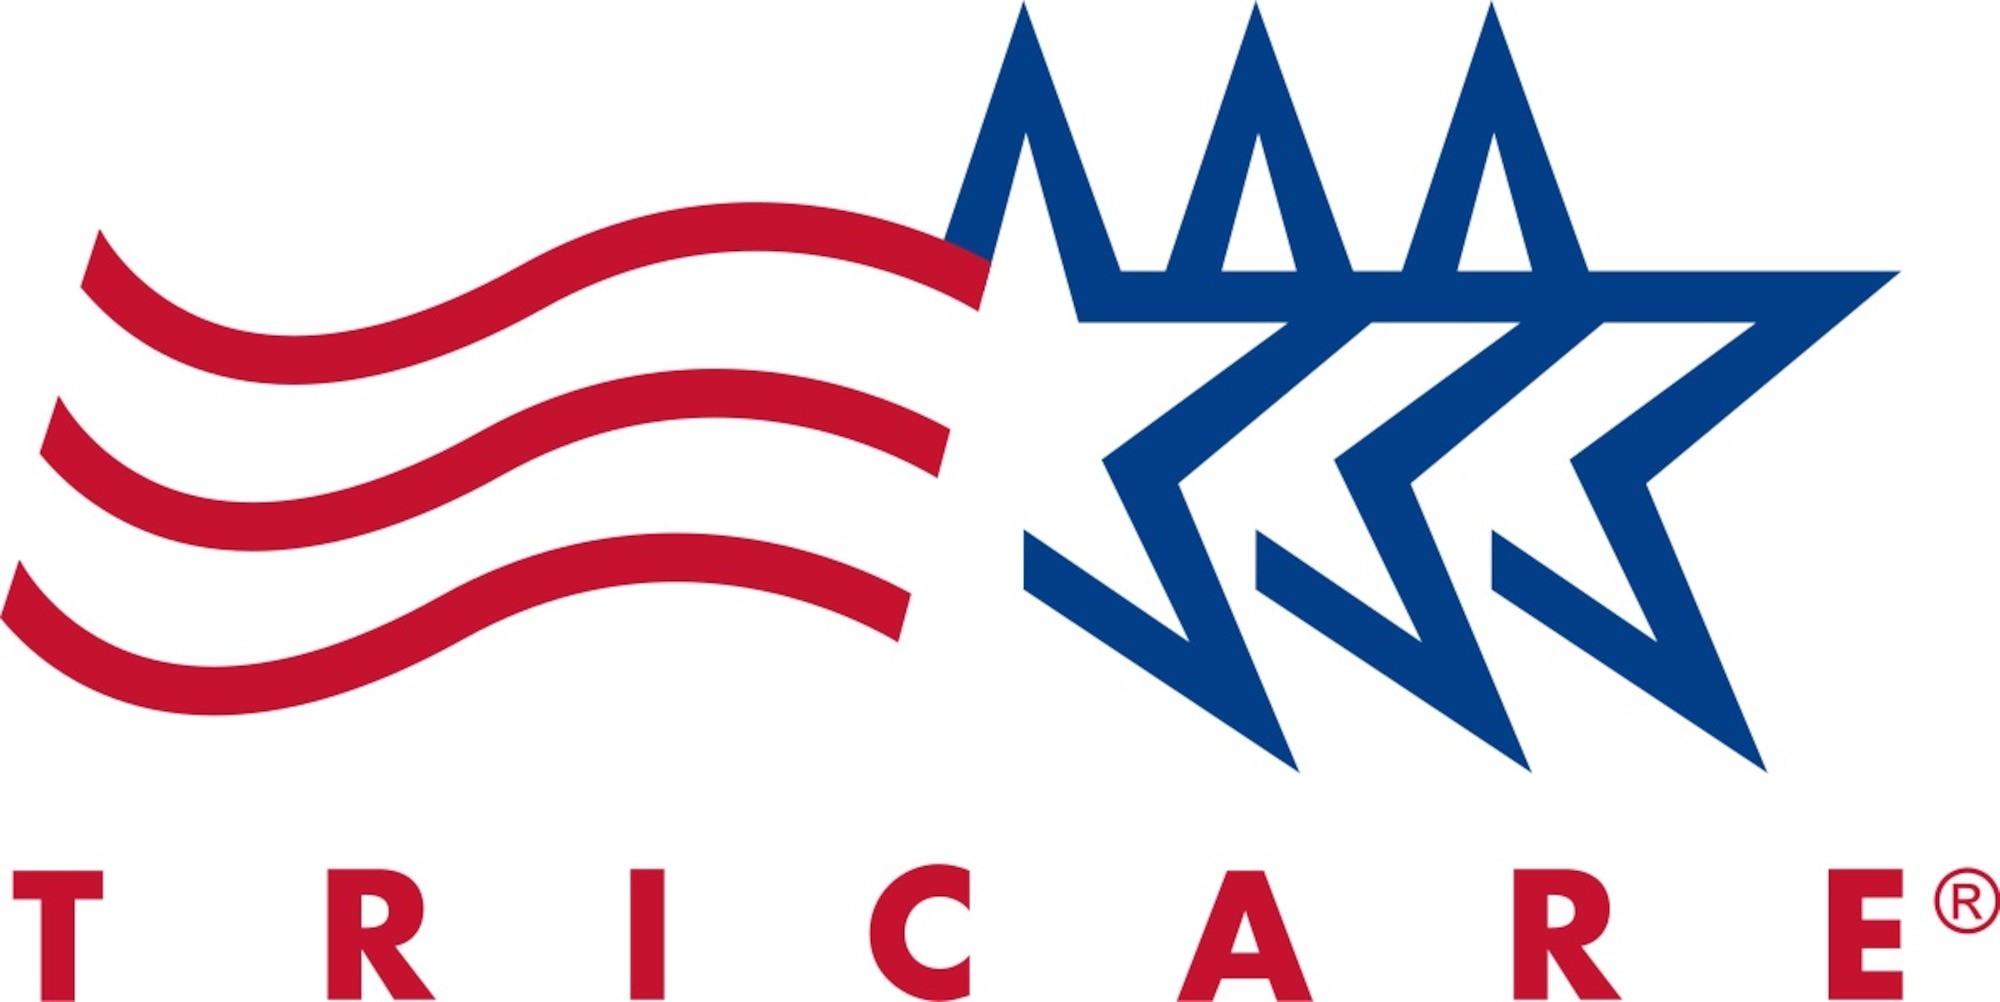 TRICARE open season is an annual period when you can enroll in or change health plans for the next year.